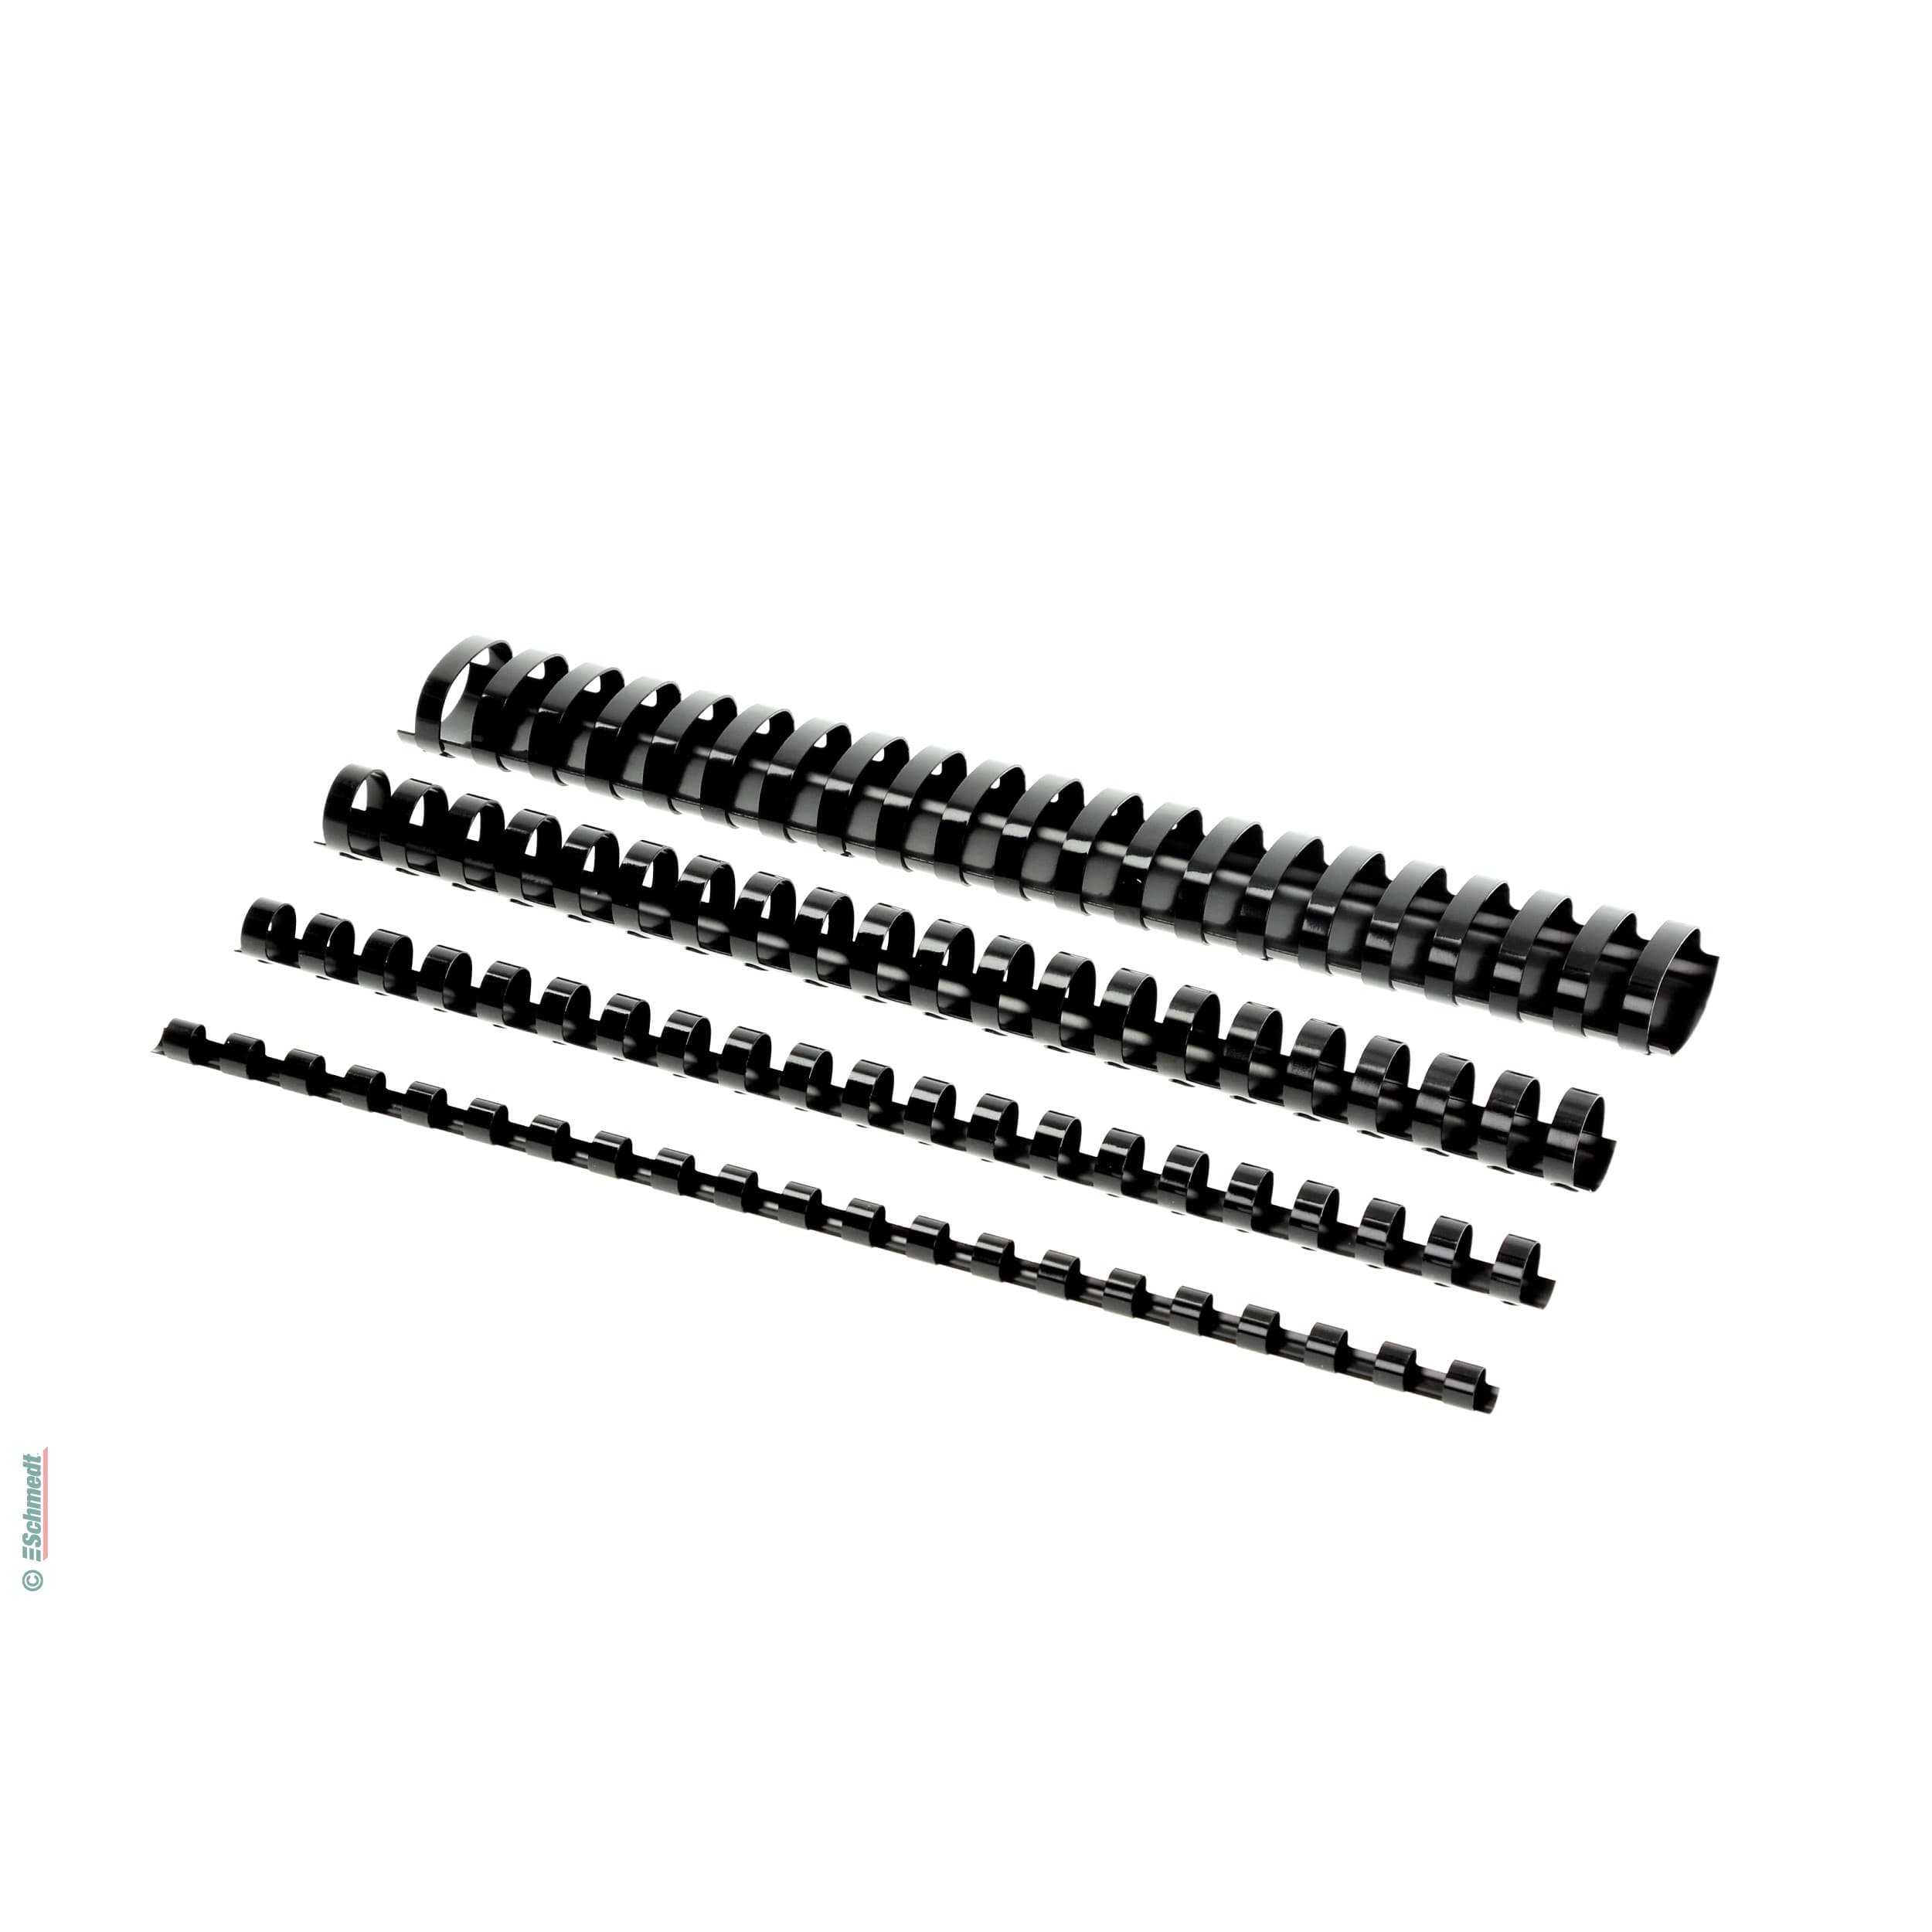 Plastic binding combs - round - Diameter (in mm) 22 - Colour black - to be processed in plastic-comb binding machines... - image-1